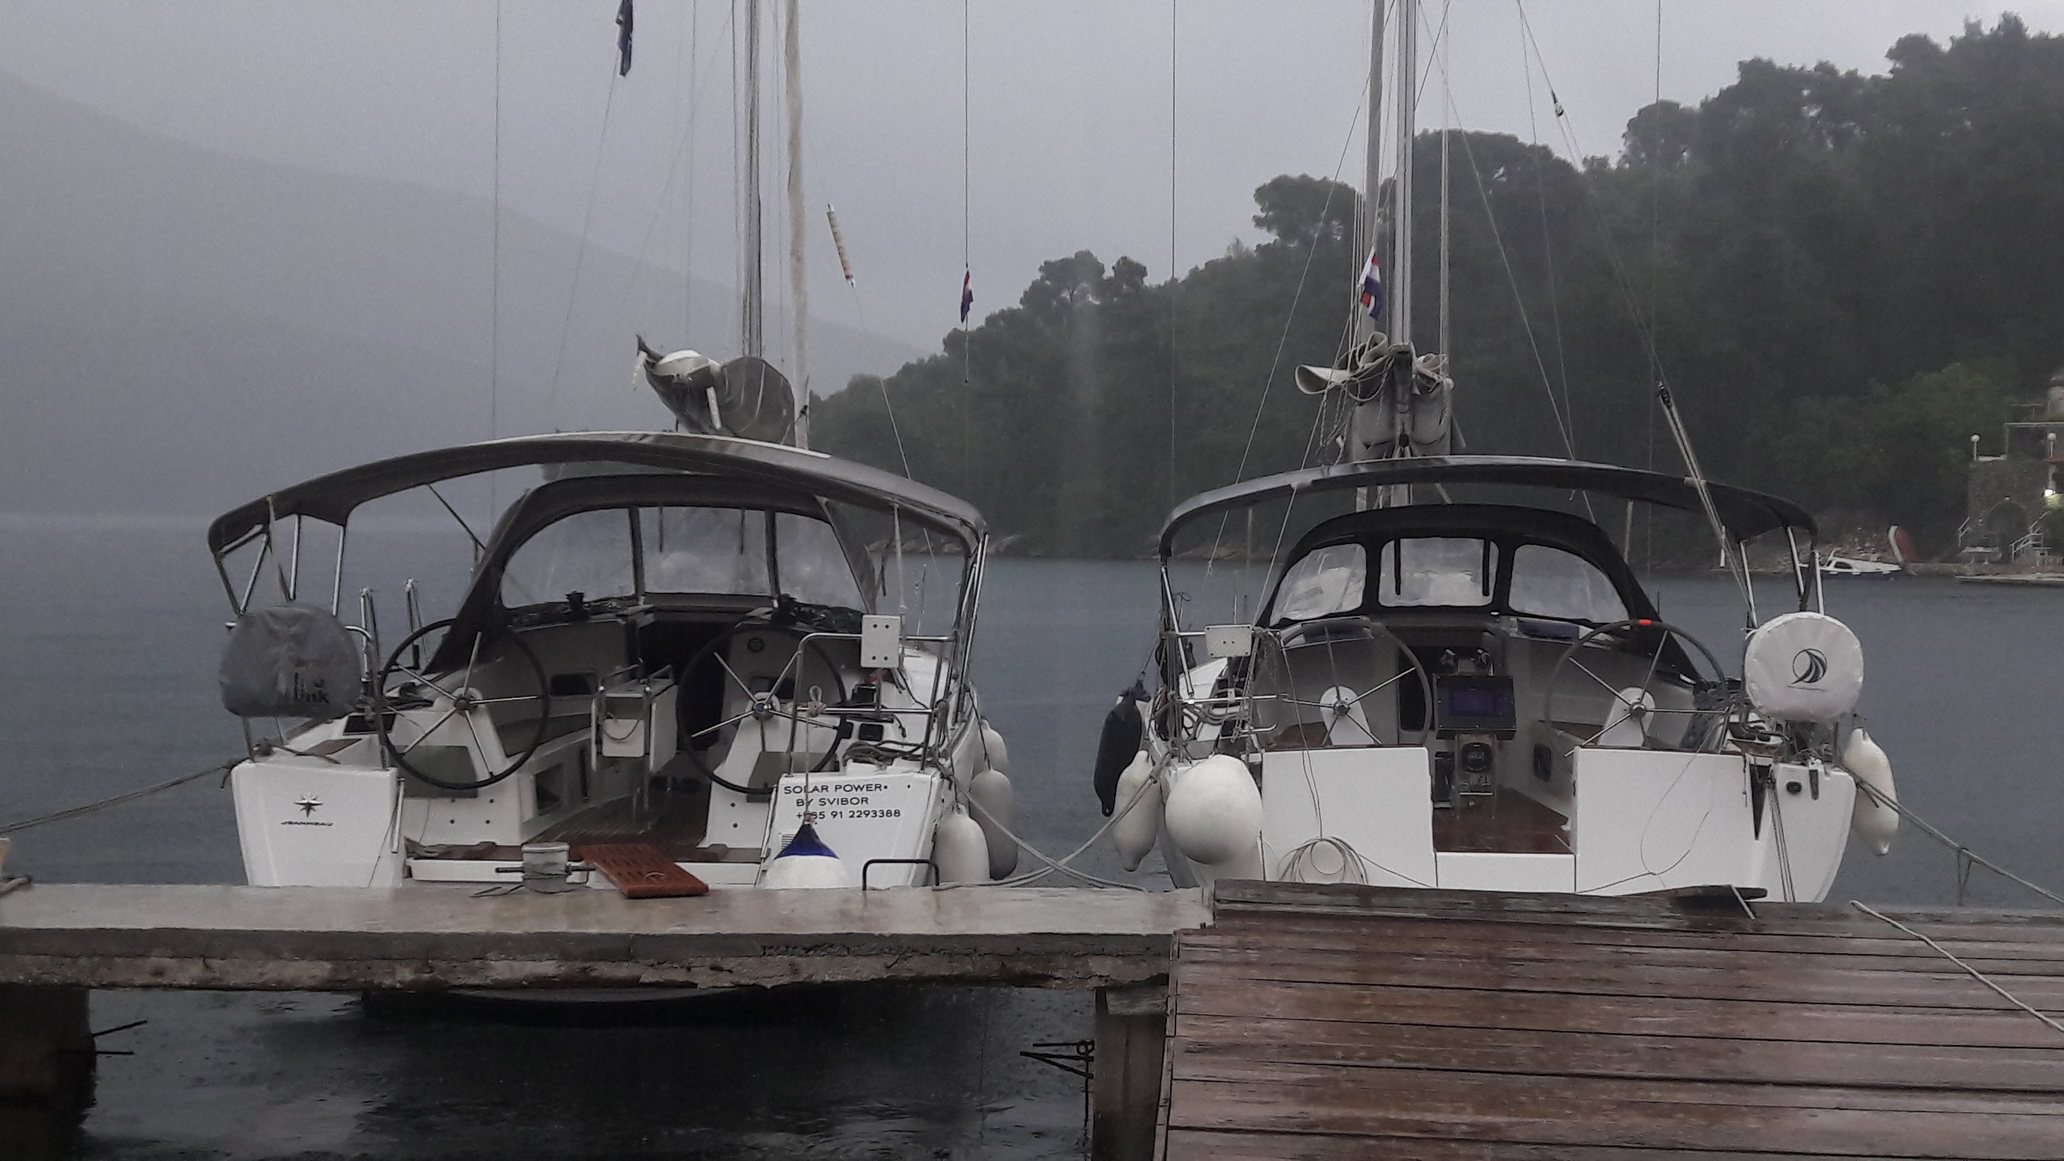 Two boats in the rain